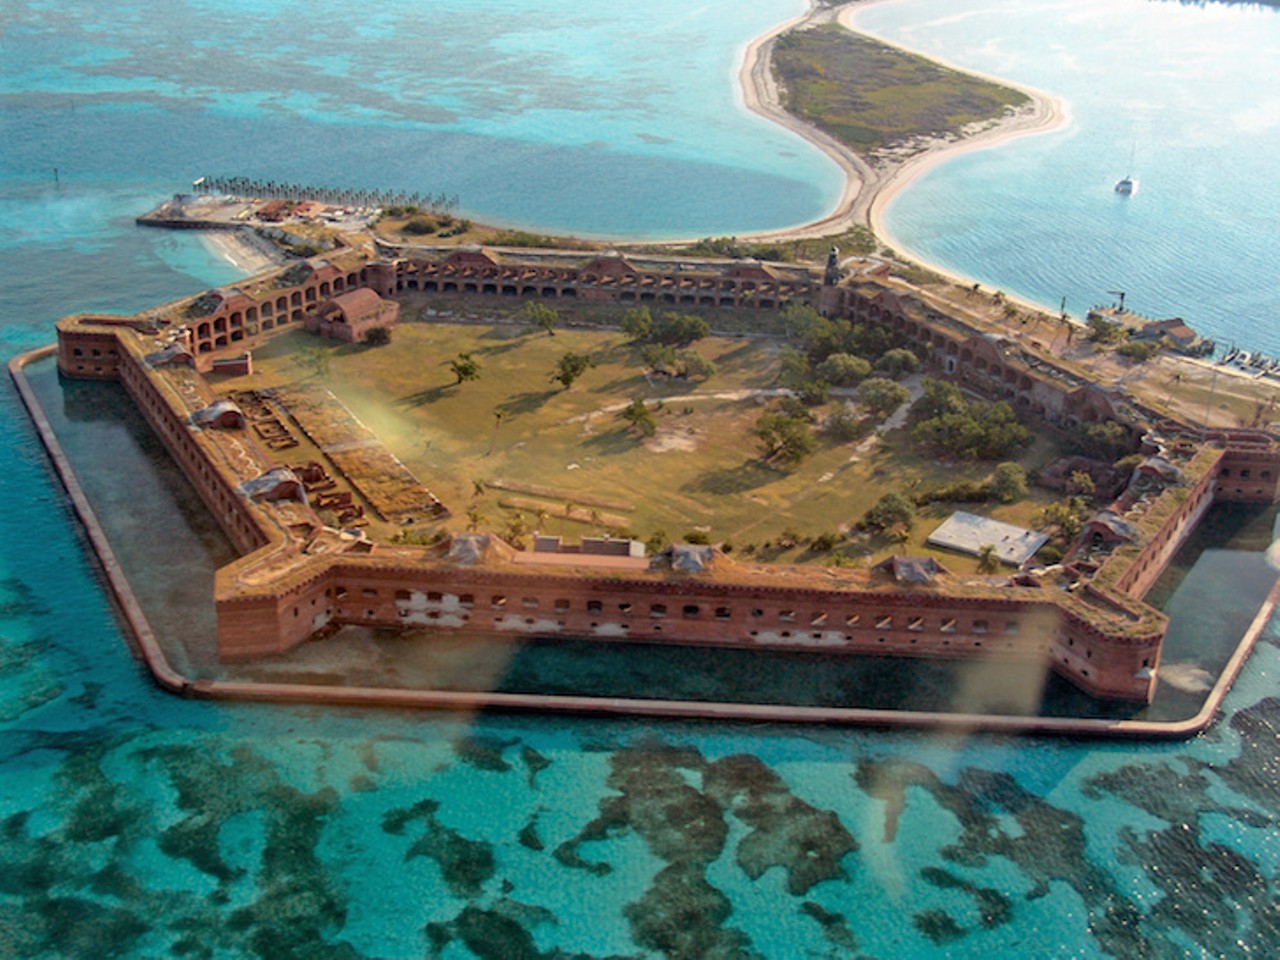 Dry Tortugas
Accessible only by boat or seaplane, this secluded island is packed with national history. Take a walk through the ramparts of the 14th century Fort Jefferson. The best way to explore this paradise is by snorkeling and diving. 
Photo via Adobe Stock